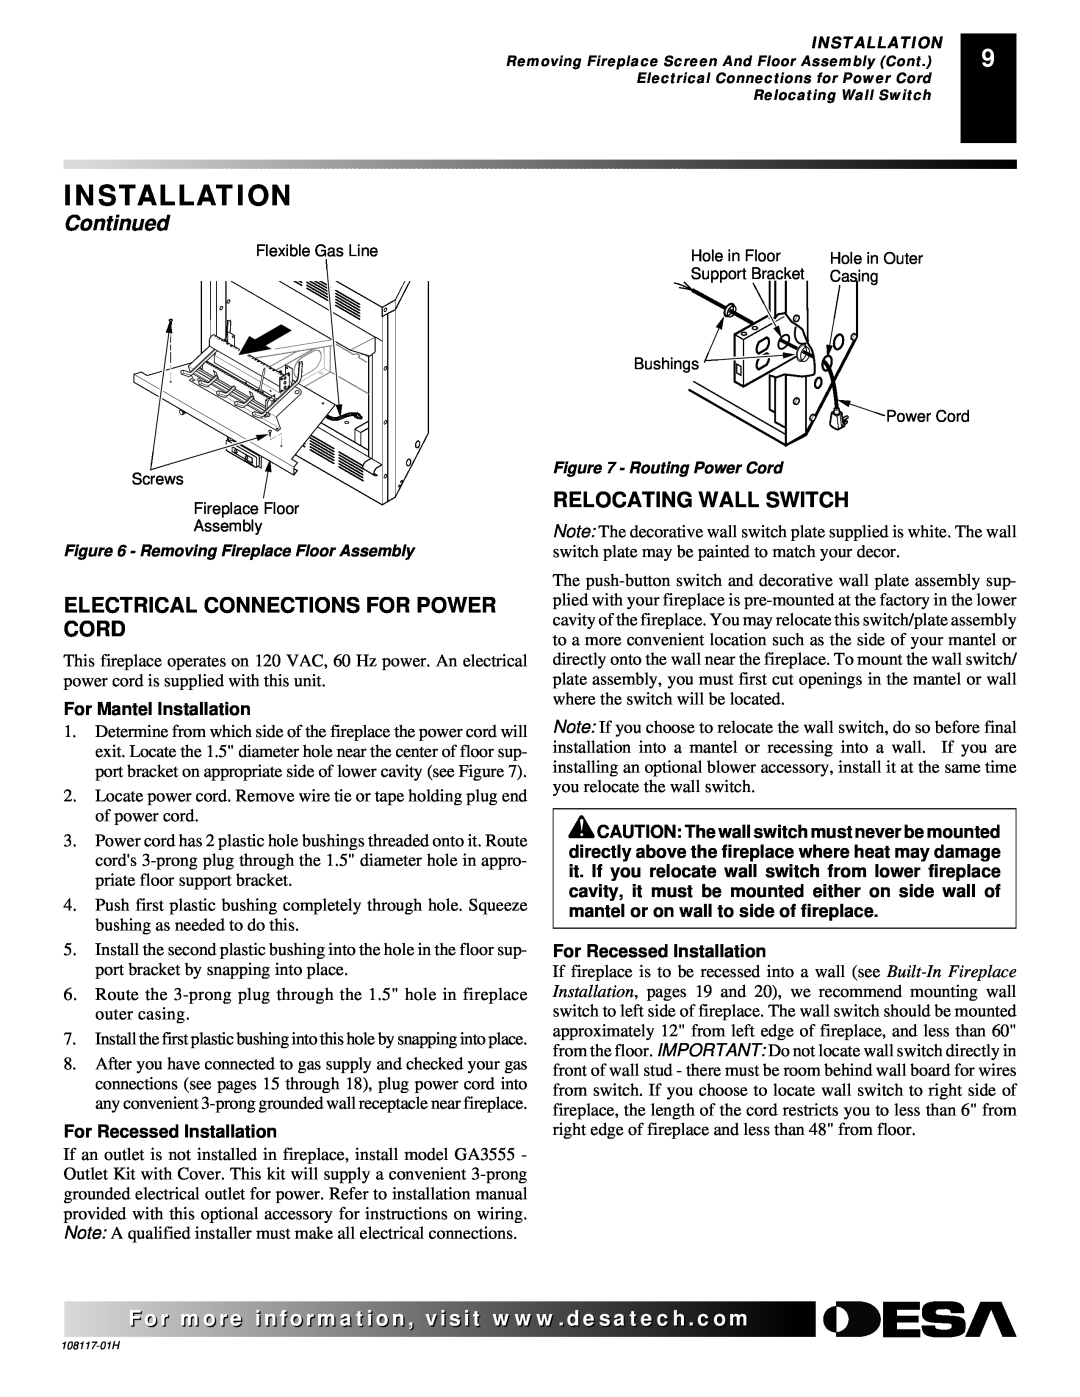 Desa EFP33PR, EFP33NR Electrical Connections For Power Cord, Relocating Wall Switch, Installation, Continued 